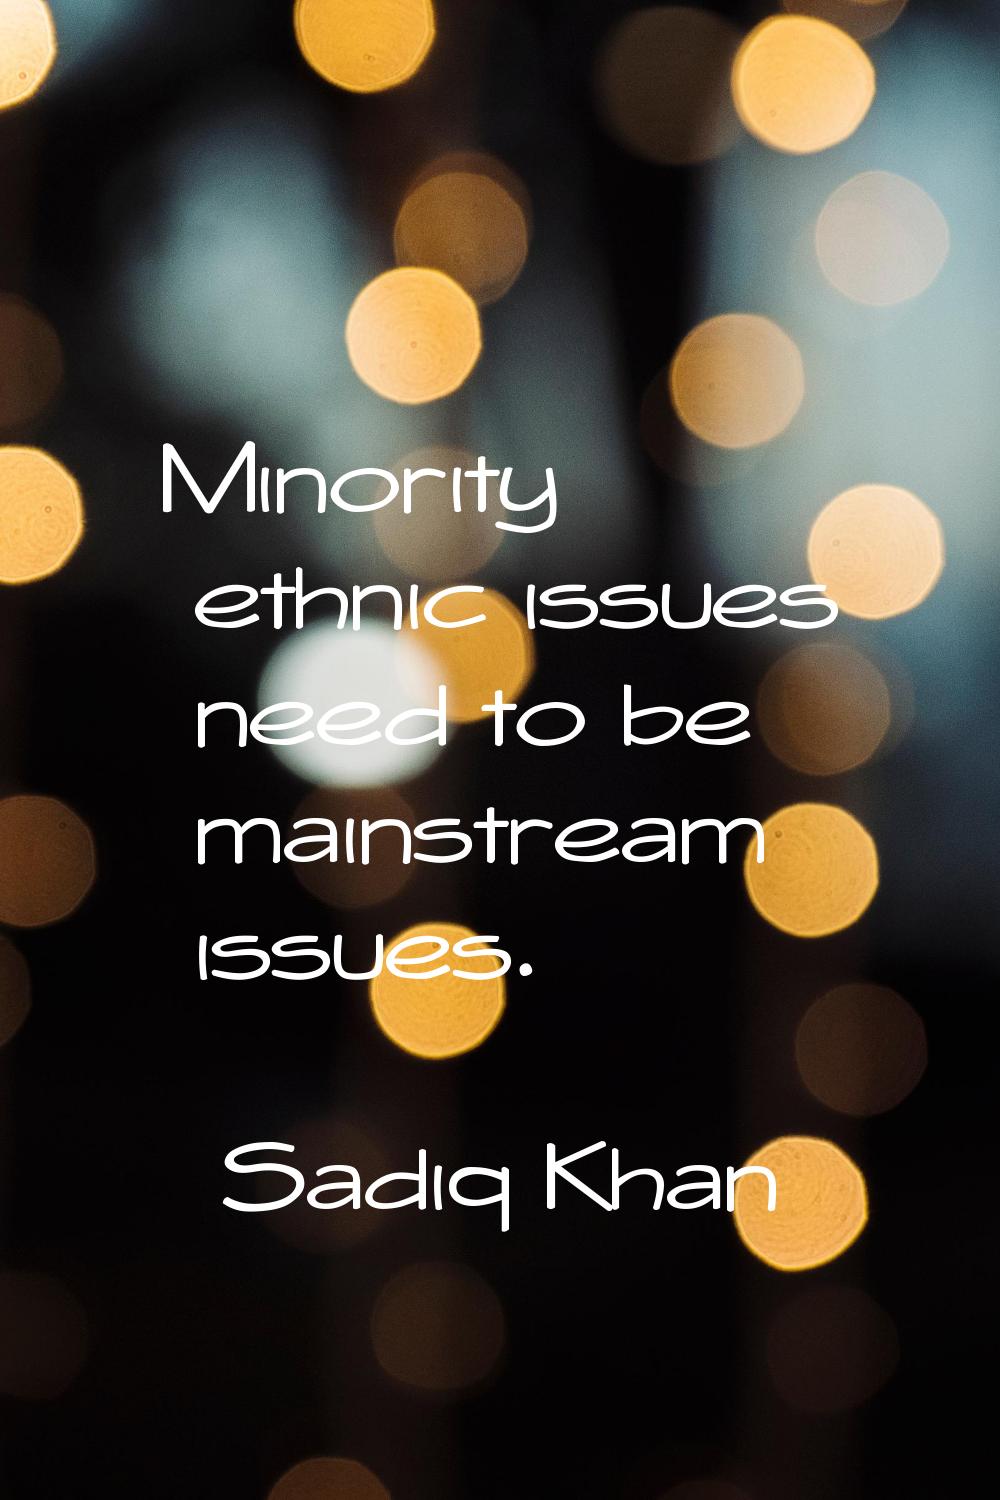 Minority ethnic issues need to be mainstream issues.